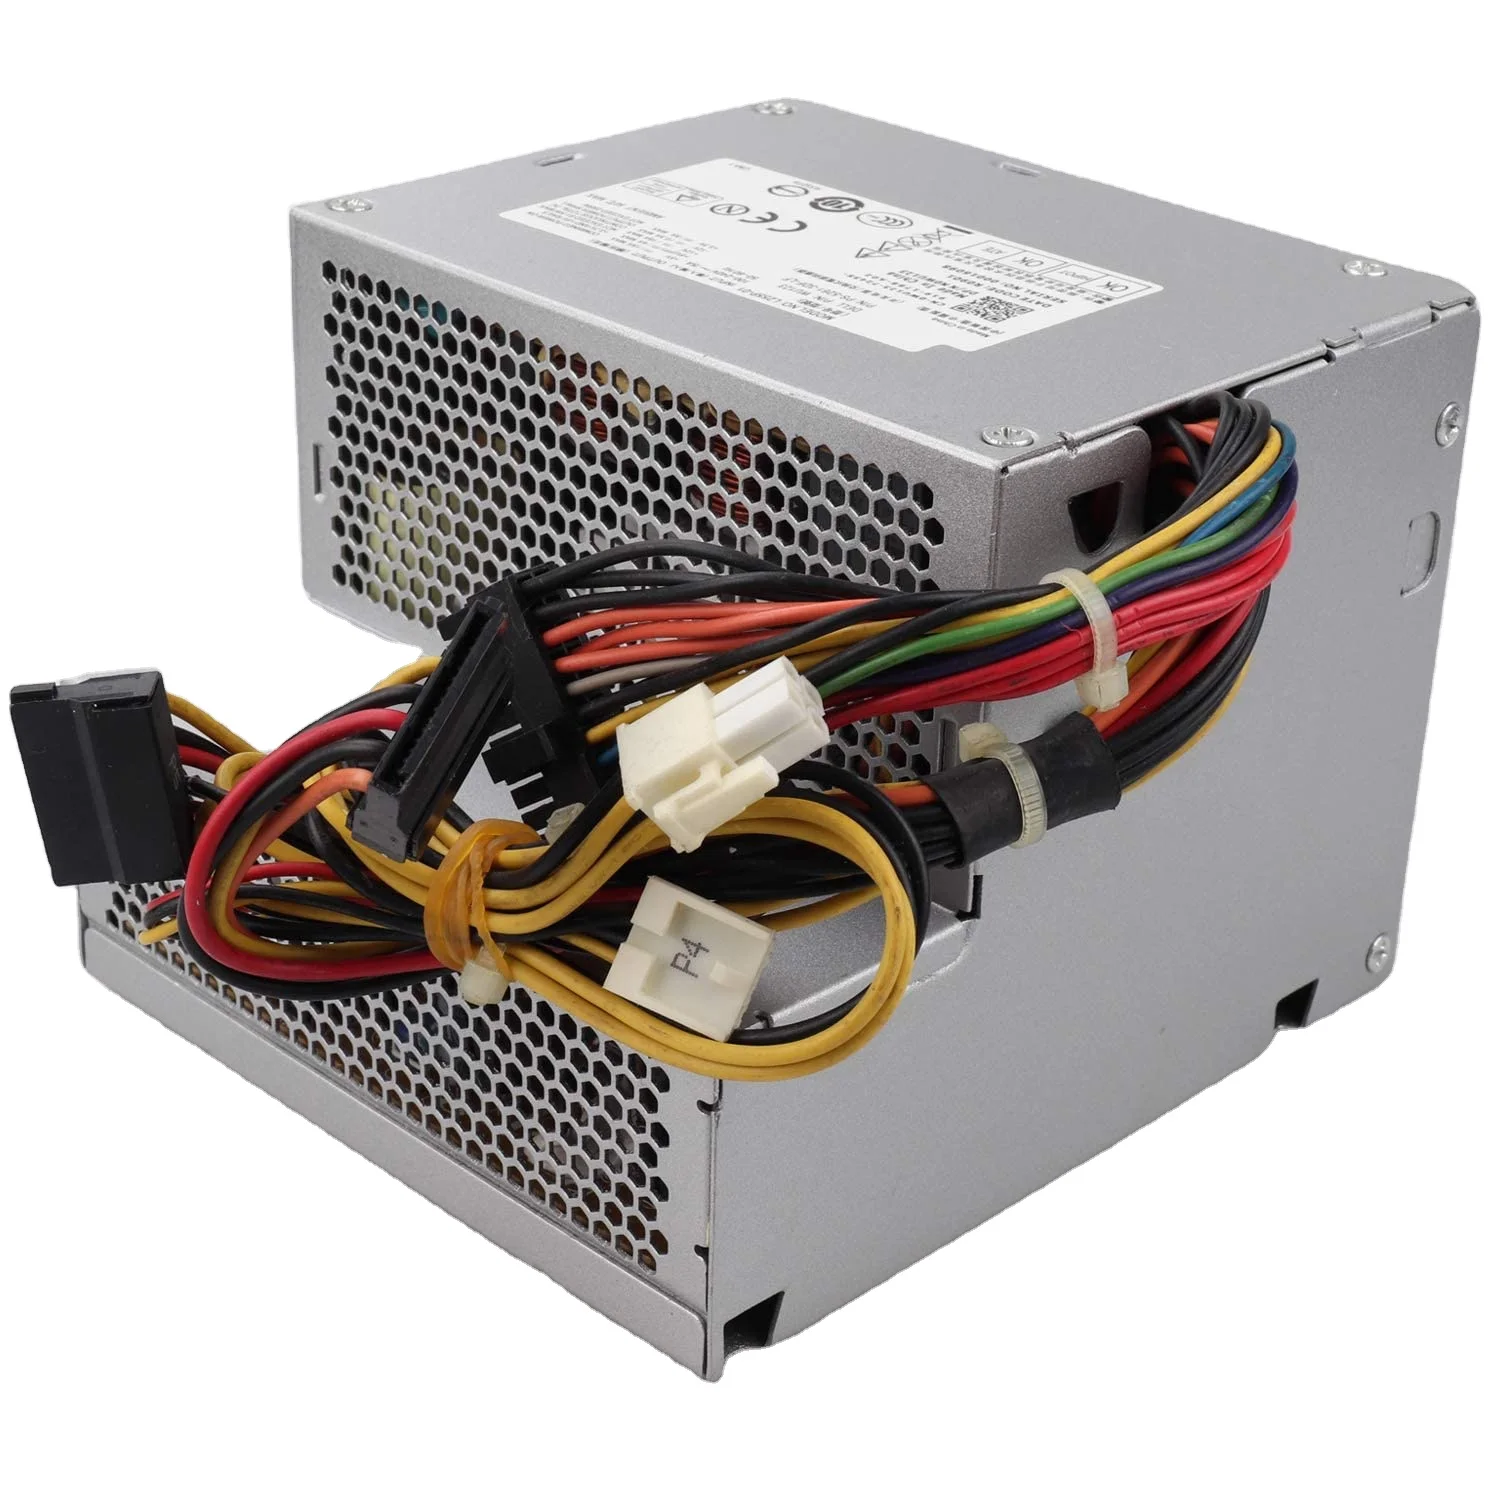 Hen The cry 255w F255e-01 N249m Power Supply Replacement For Dell Optiplex 580 760 780  960 980 Dt Psu Ac255ad-00 L255p-01 V6v76 Rm110 - Buy 255w F255e-01 Psu,255w  Psu For Dell,Psu For Dell Optiplex 580 Product on Alibaba.com